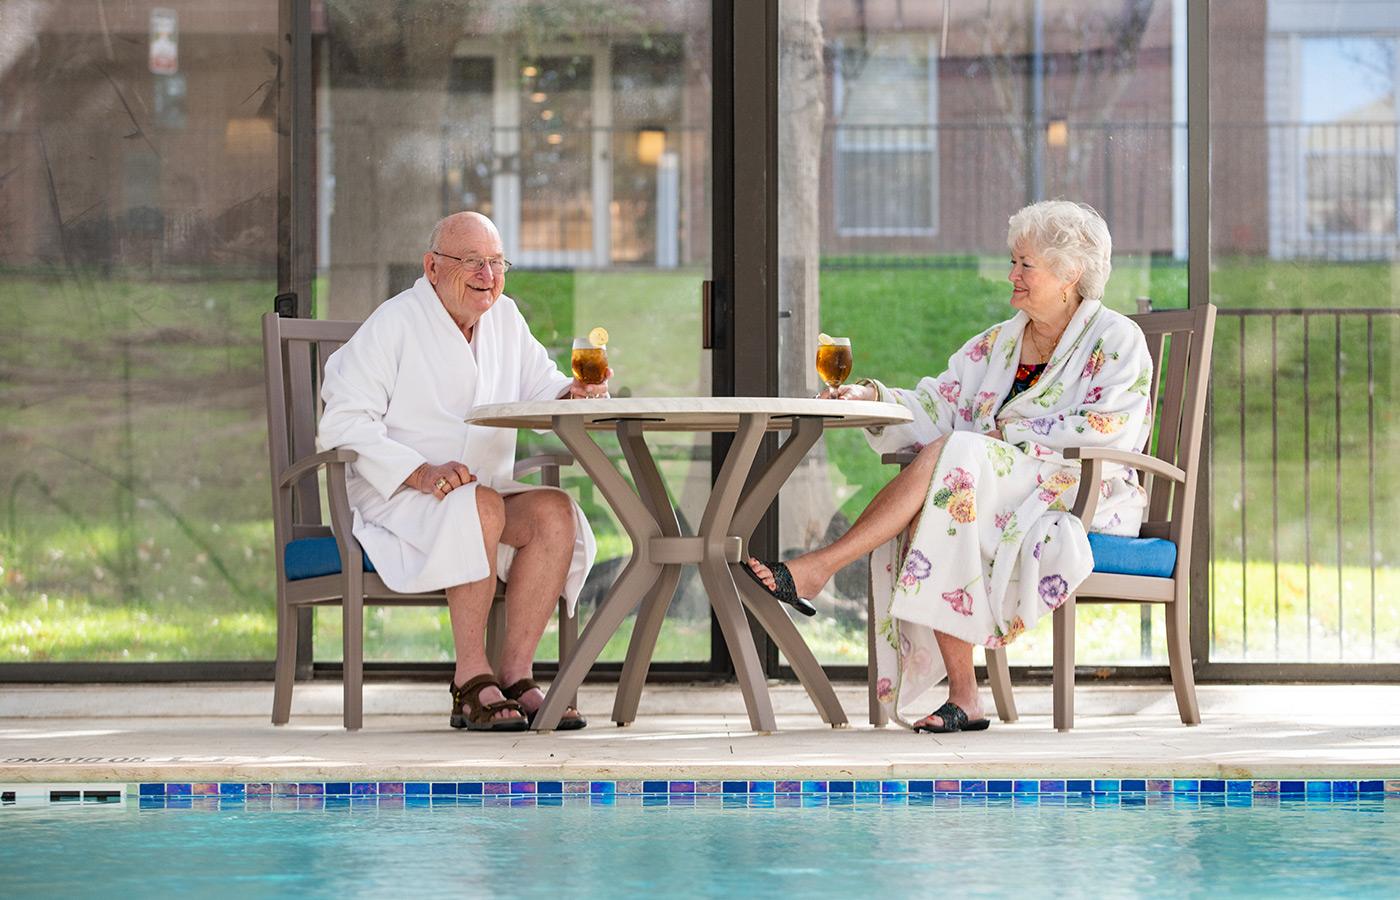 Two people sitting by the pool.